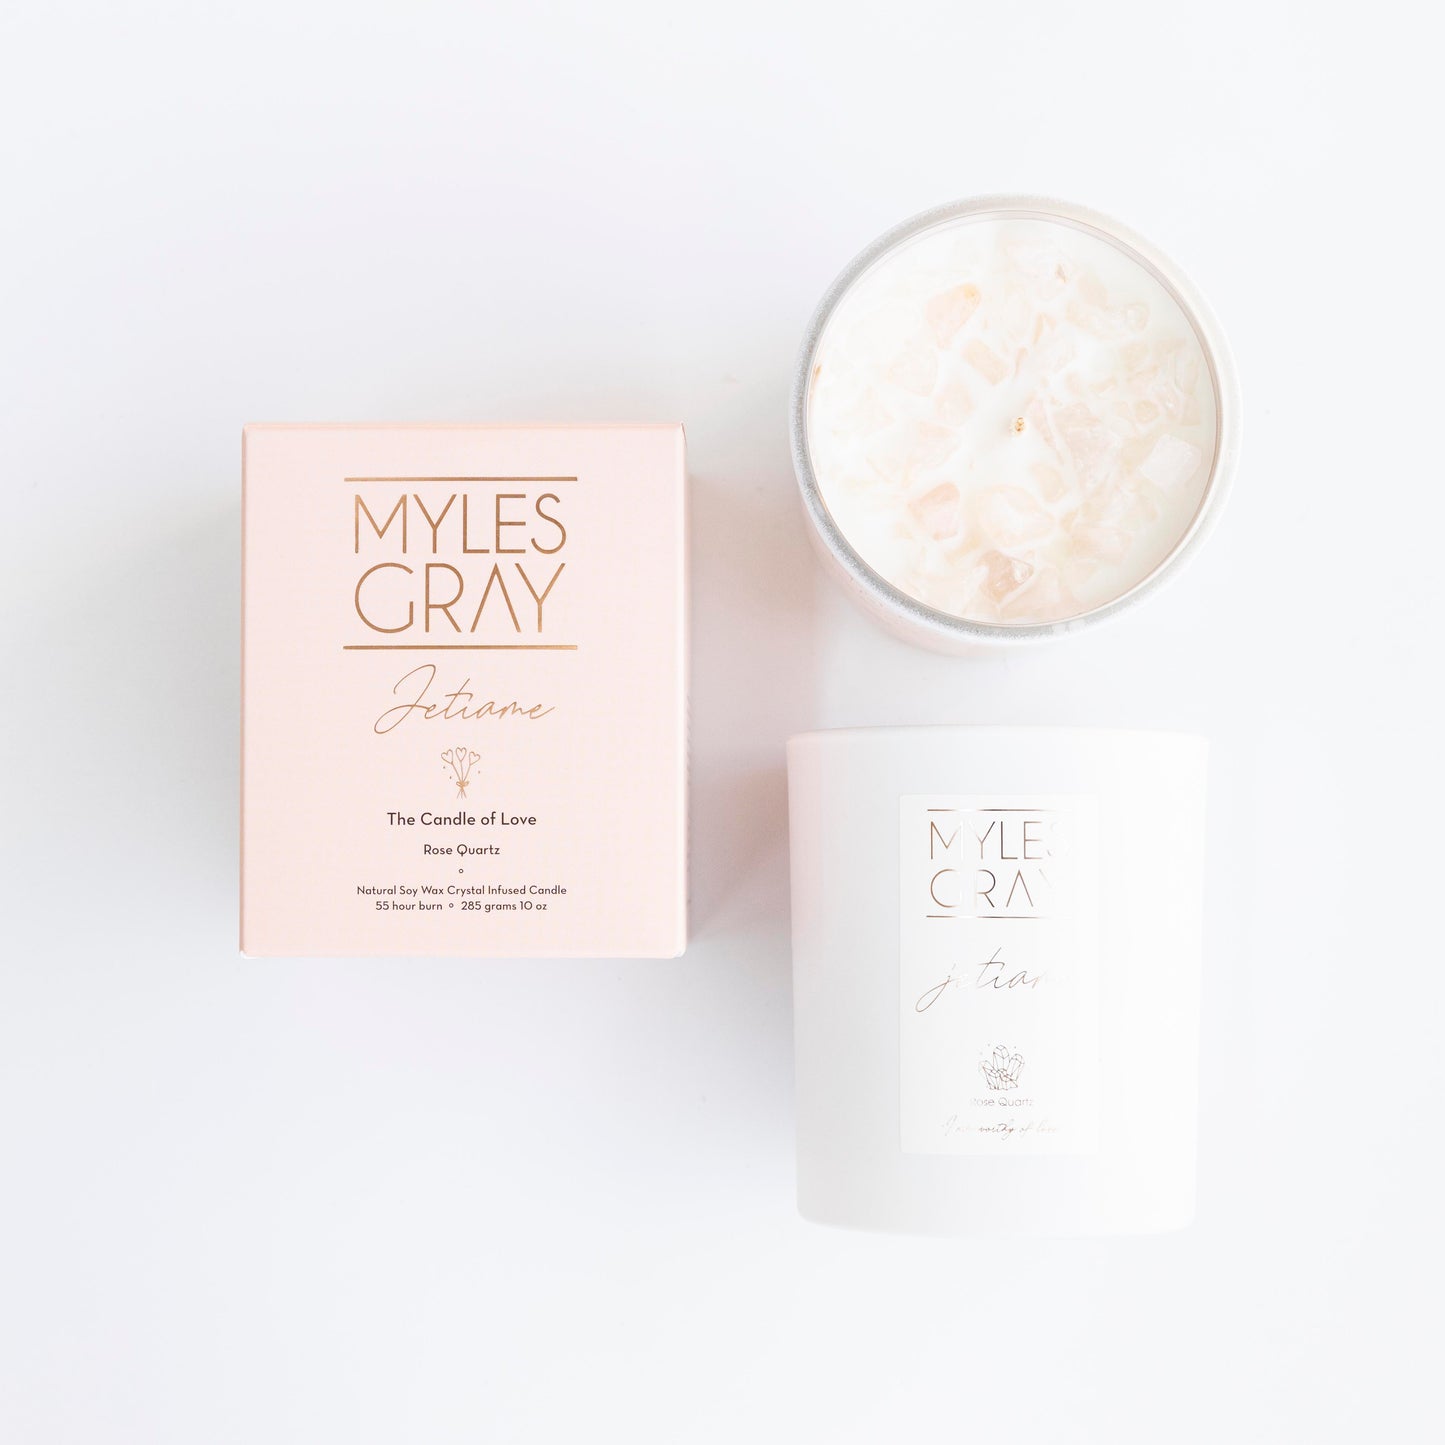 Myles Gray Jetiame Candle Candle Of Love